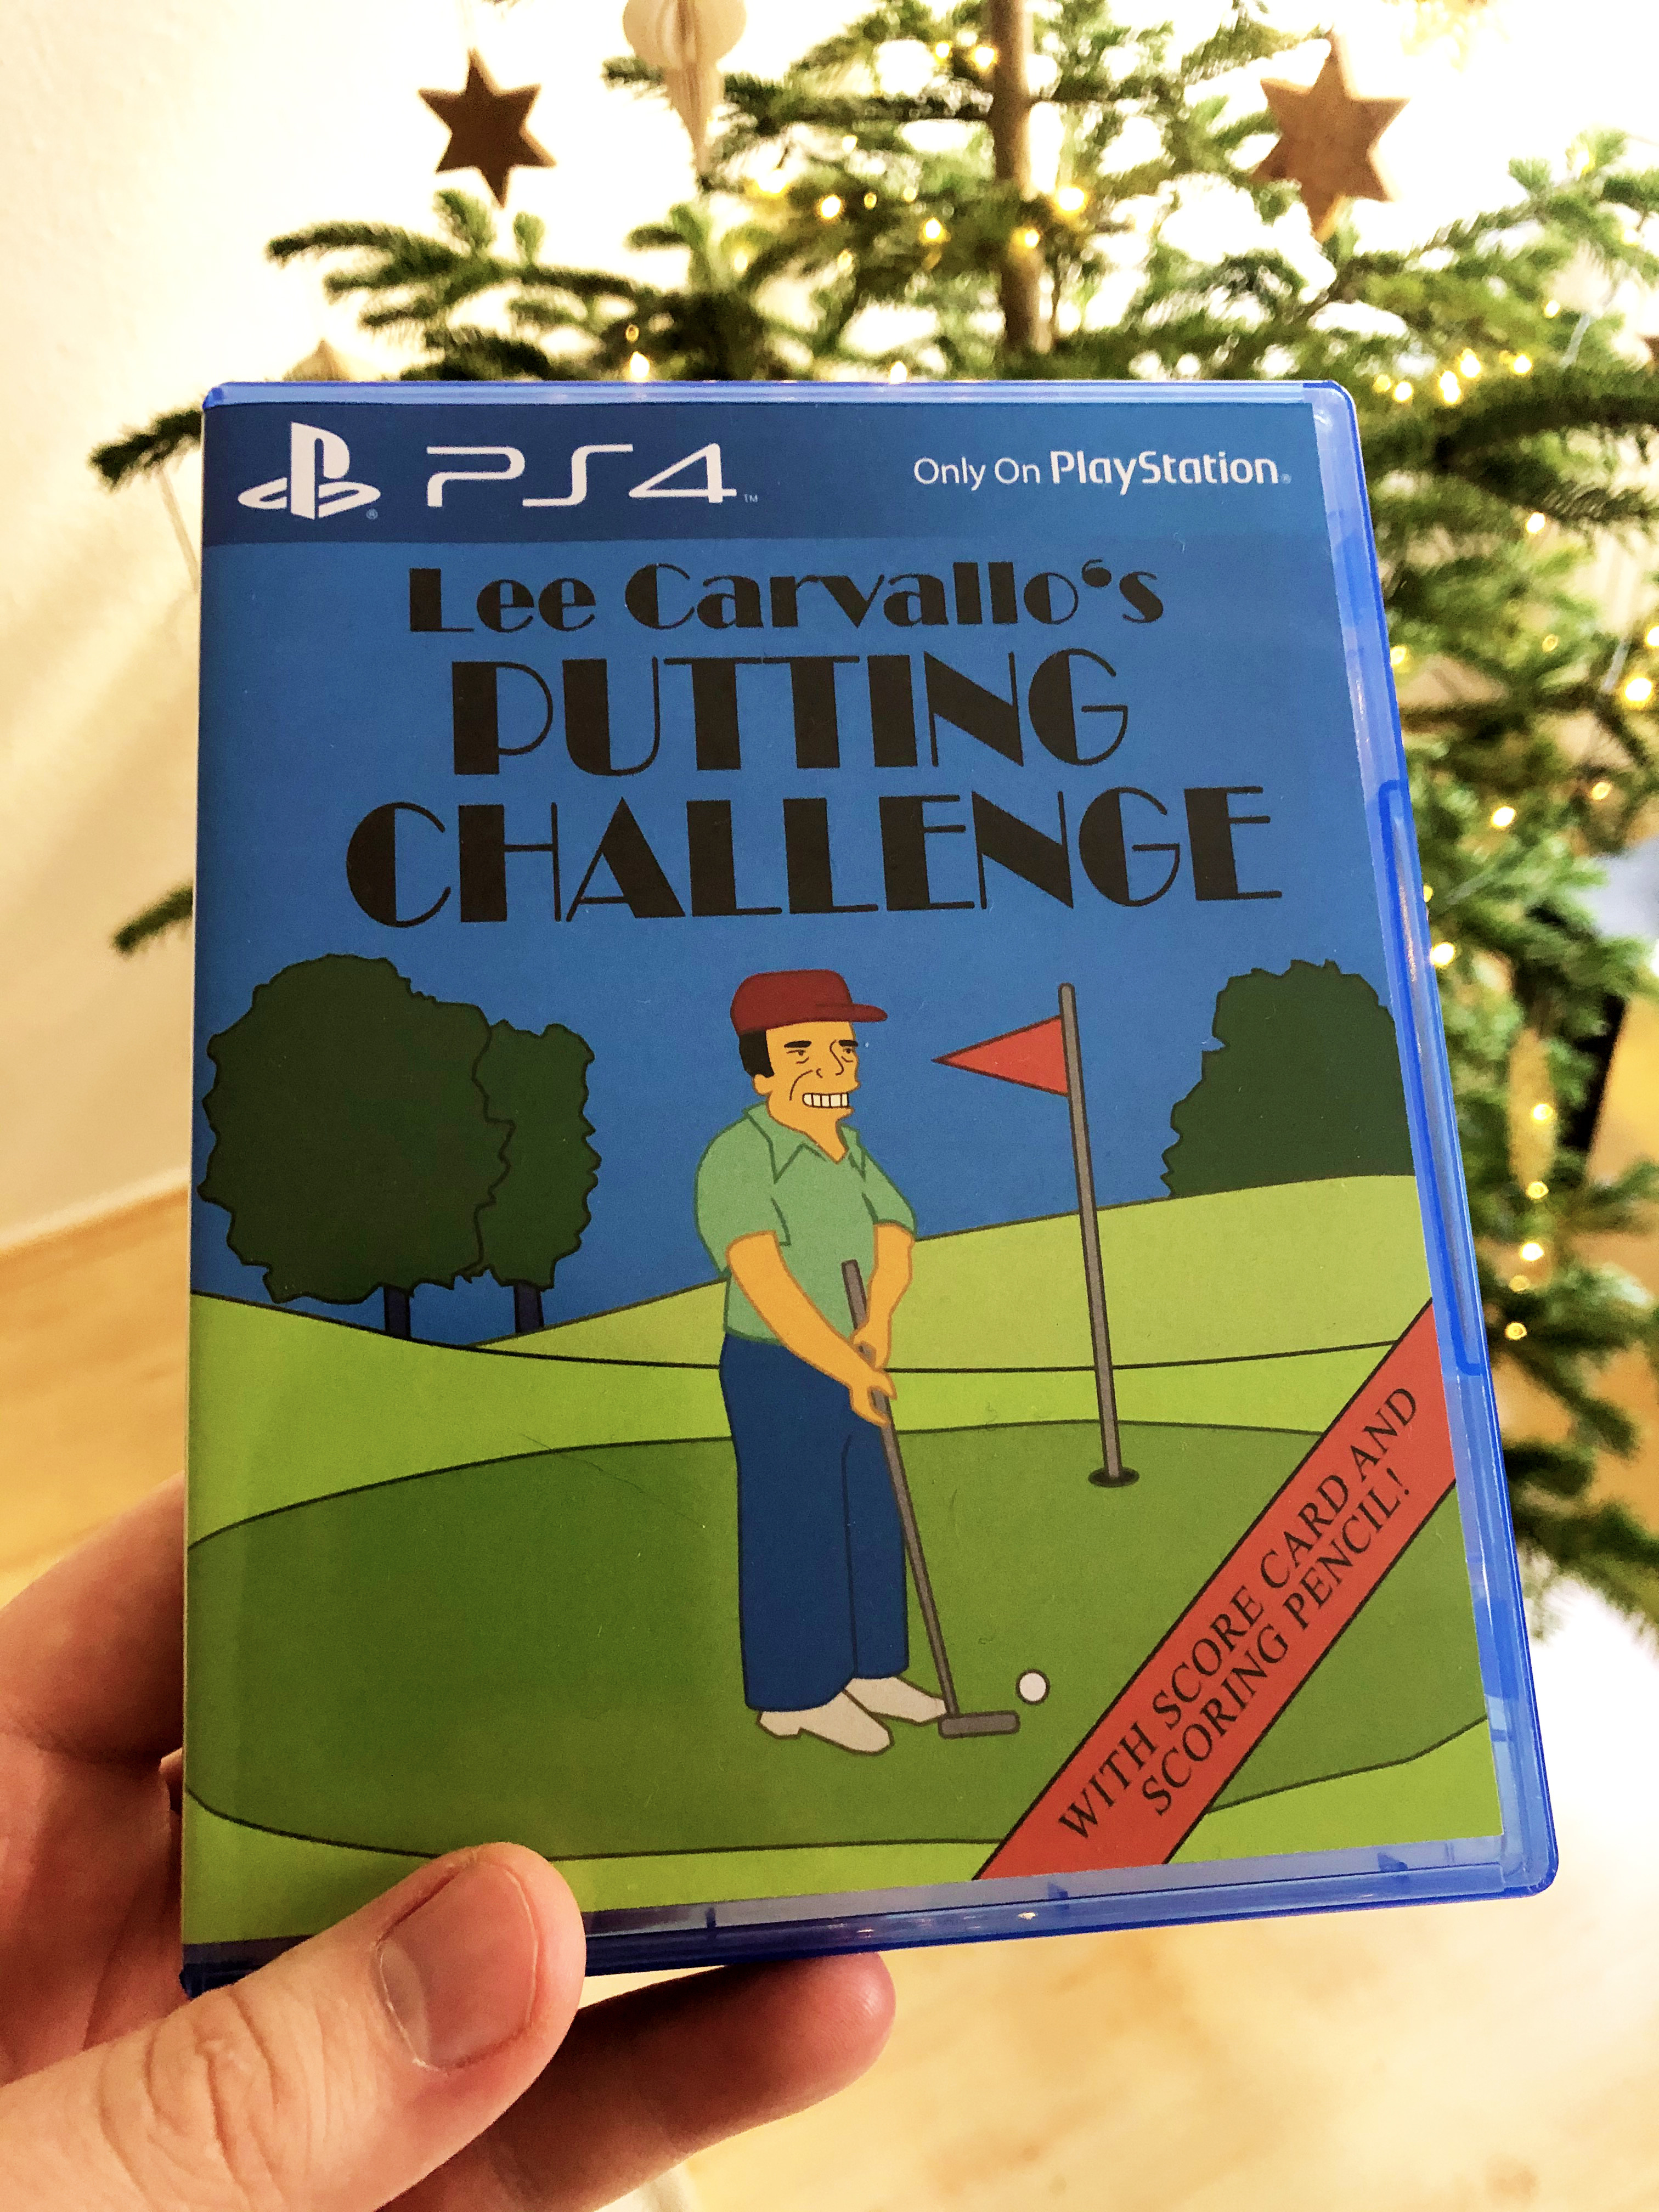 poster - Only On PlayStation B PS4 Lee Carvallo's Putting Challenge With Score Card And Scoring Pencil